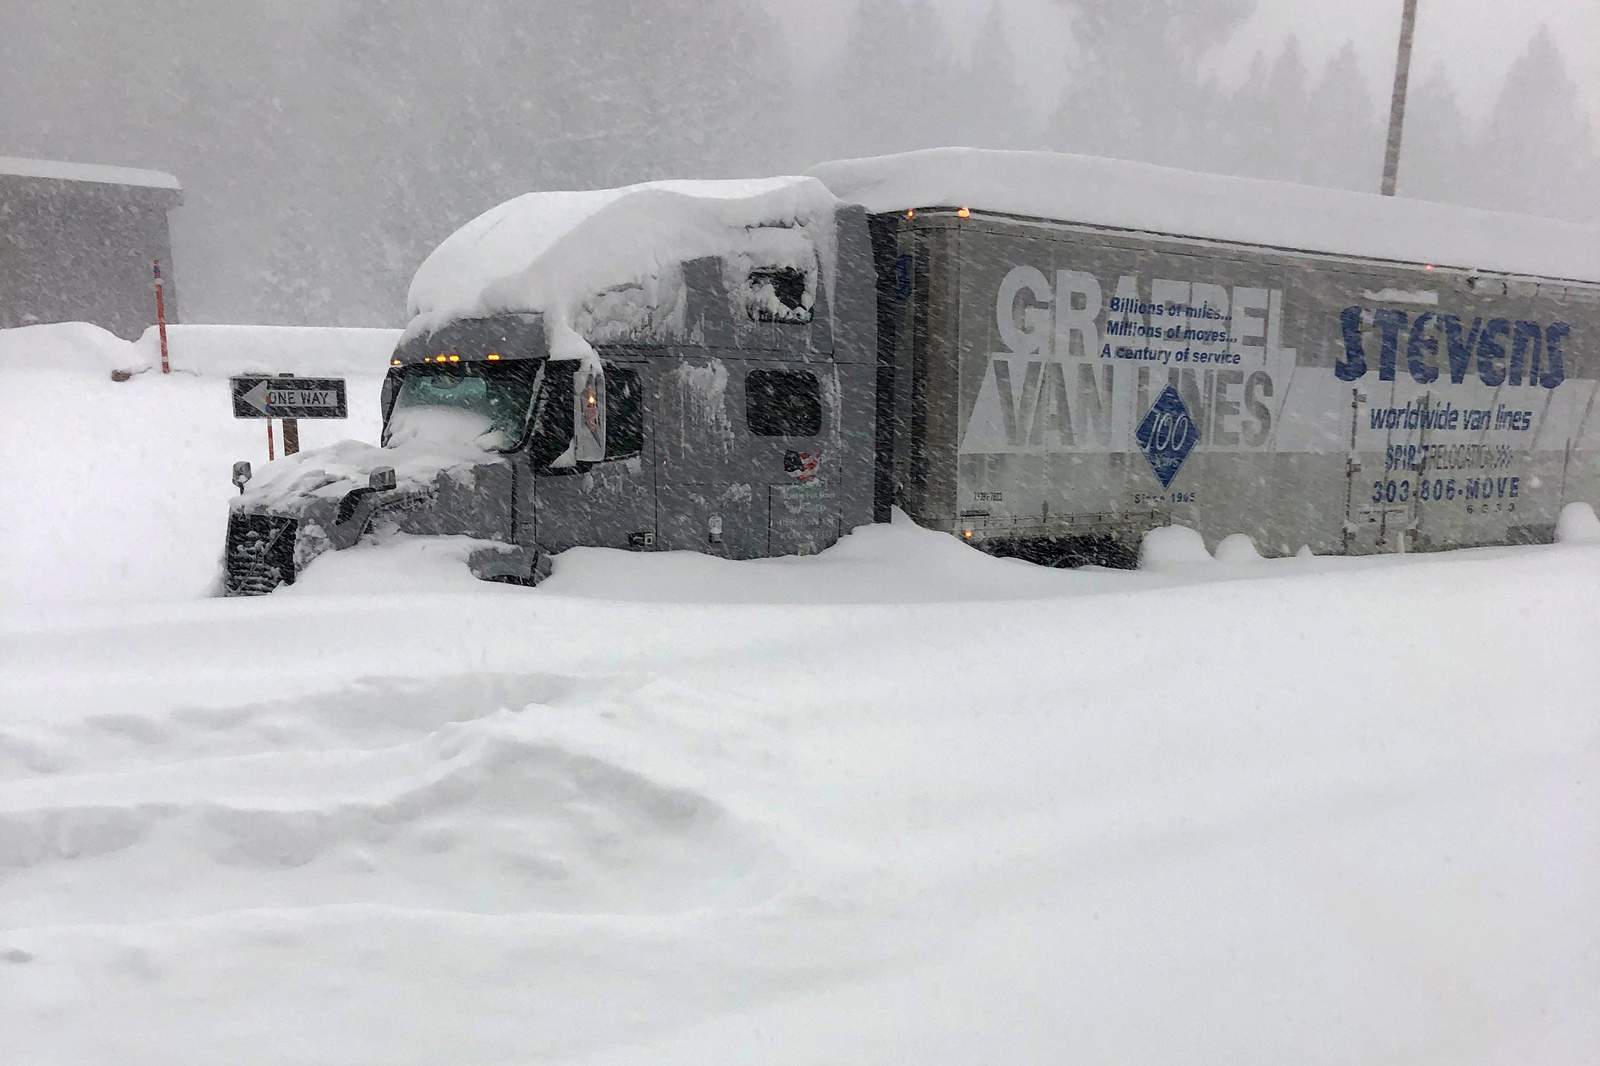 Atmospheric river storm drenches California, snow piles high